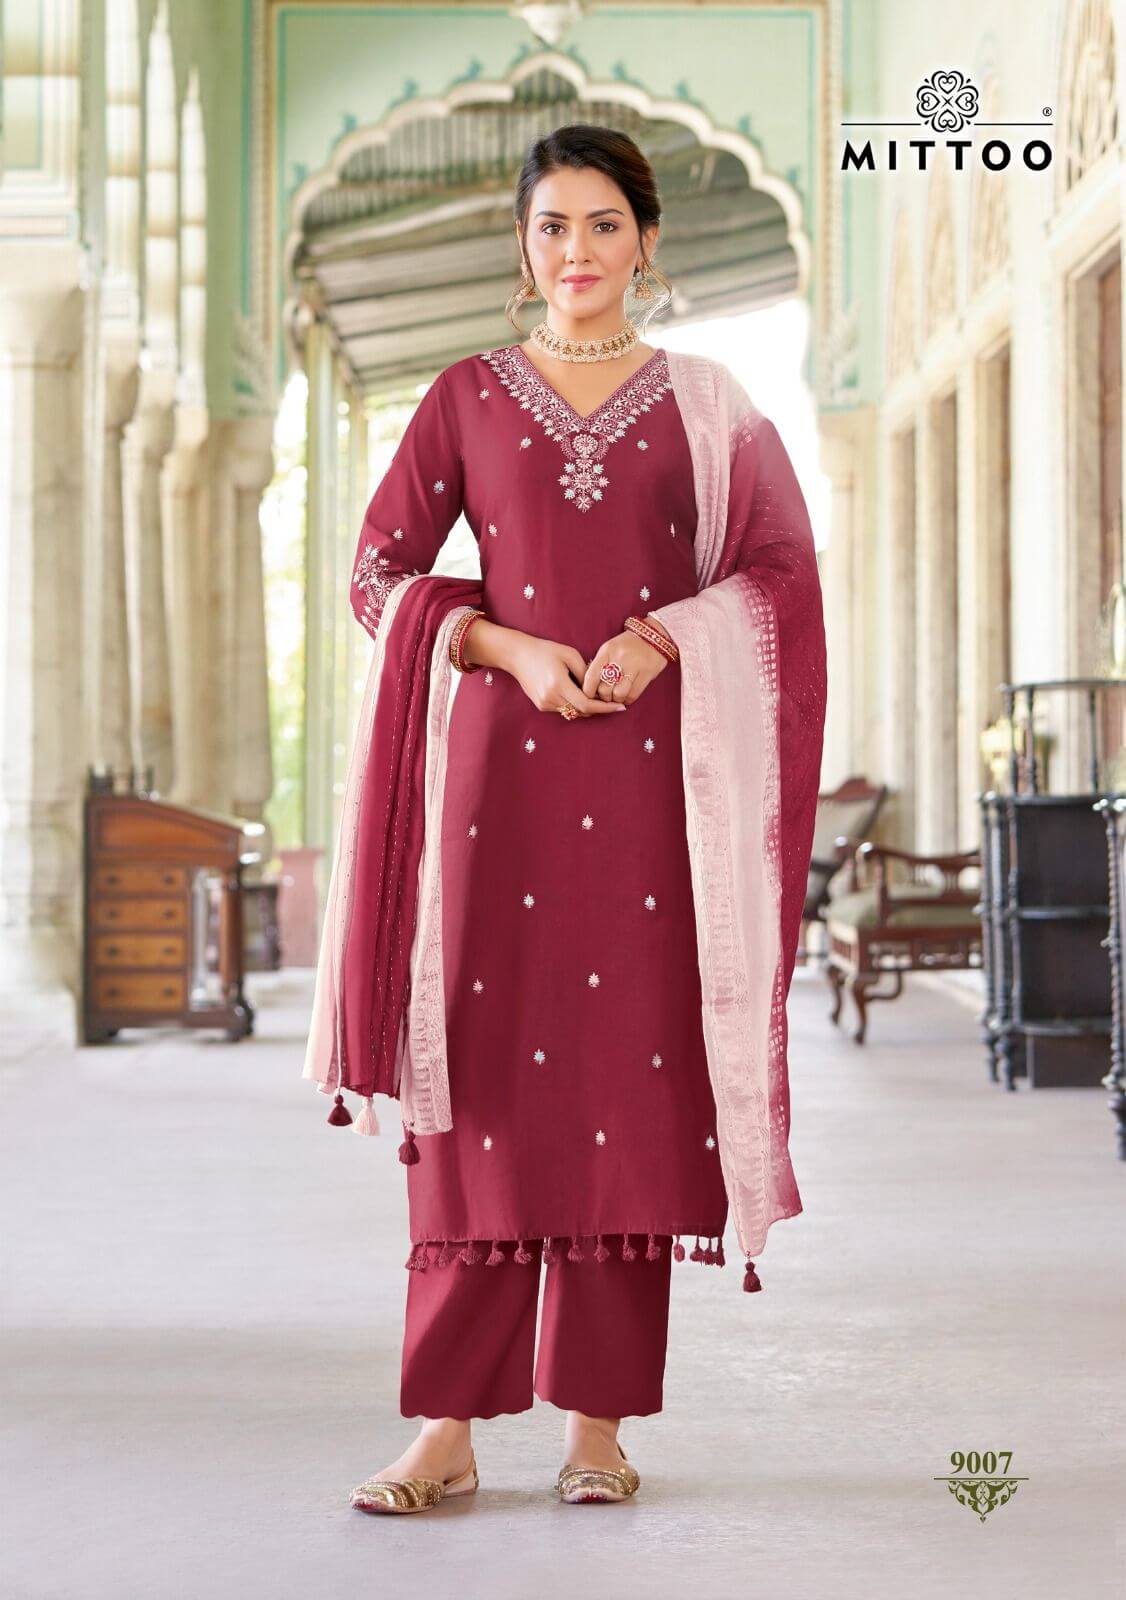 Mittoo Mosam Vol 2 Embroidery Salwar Kameez Catalog collection 1